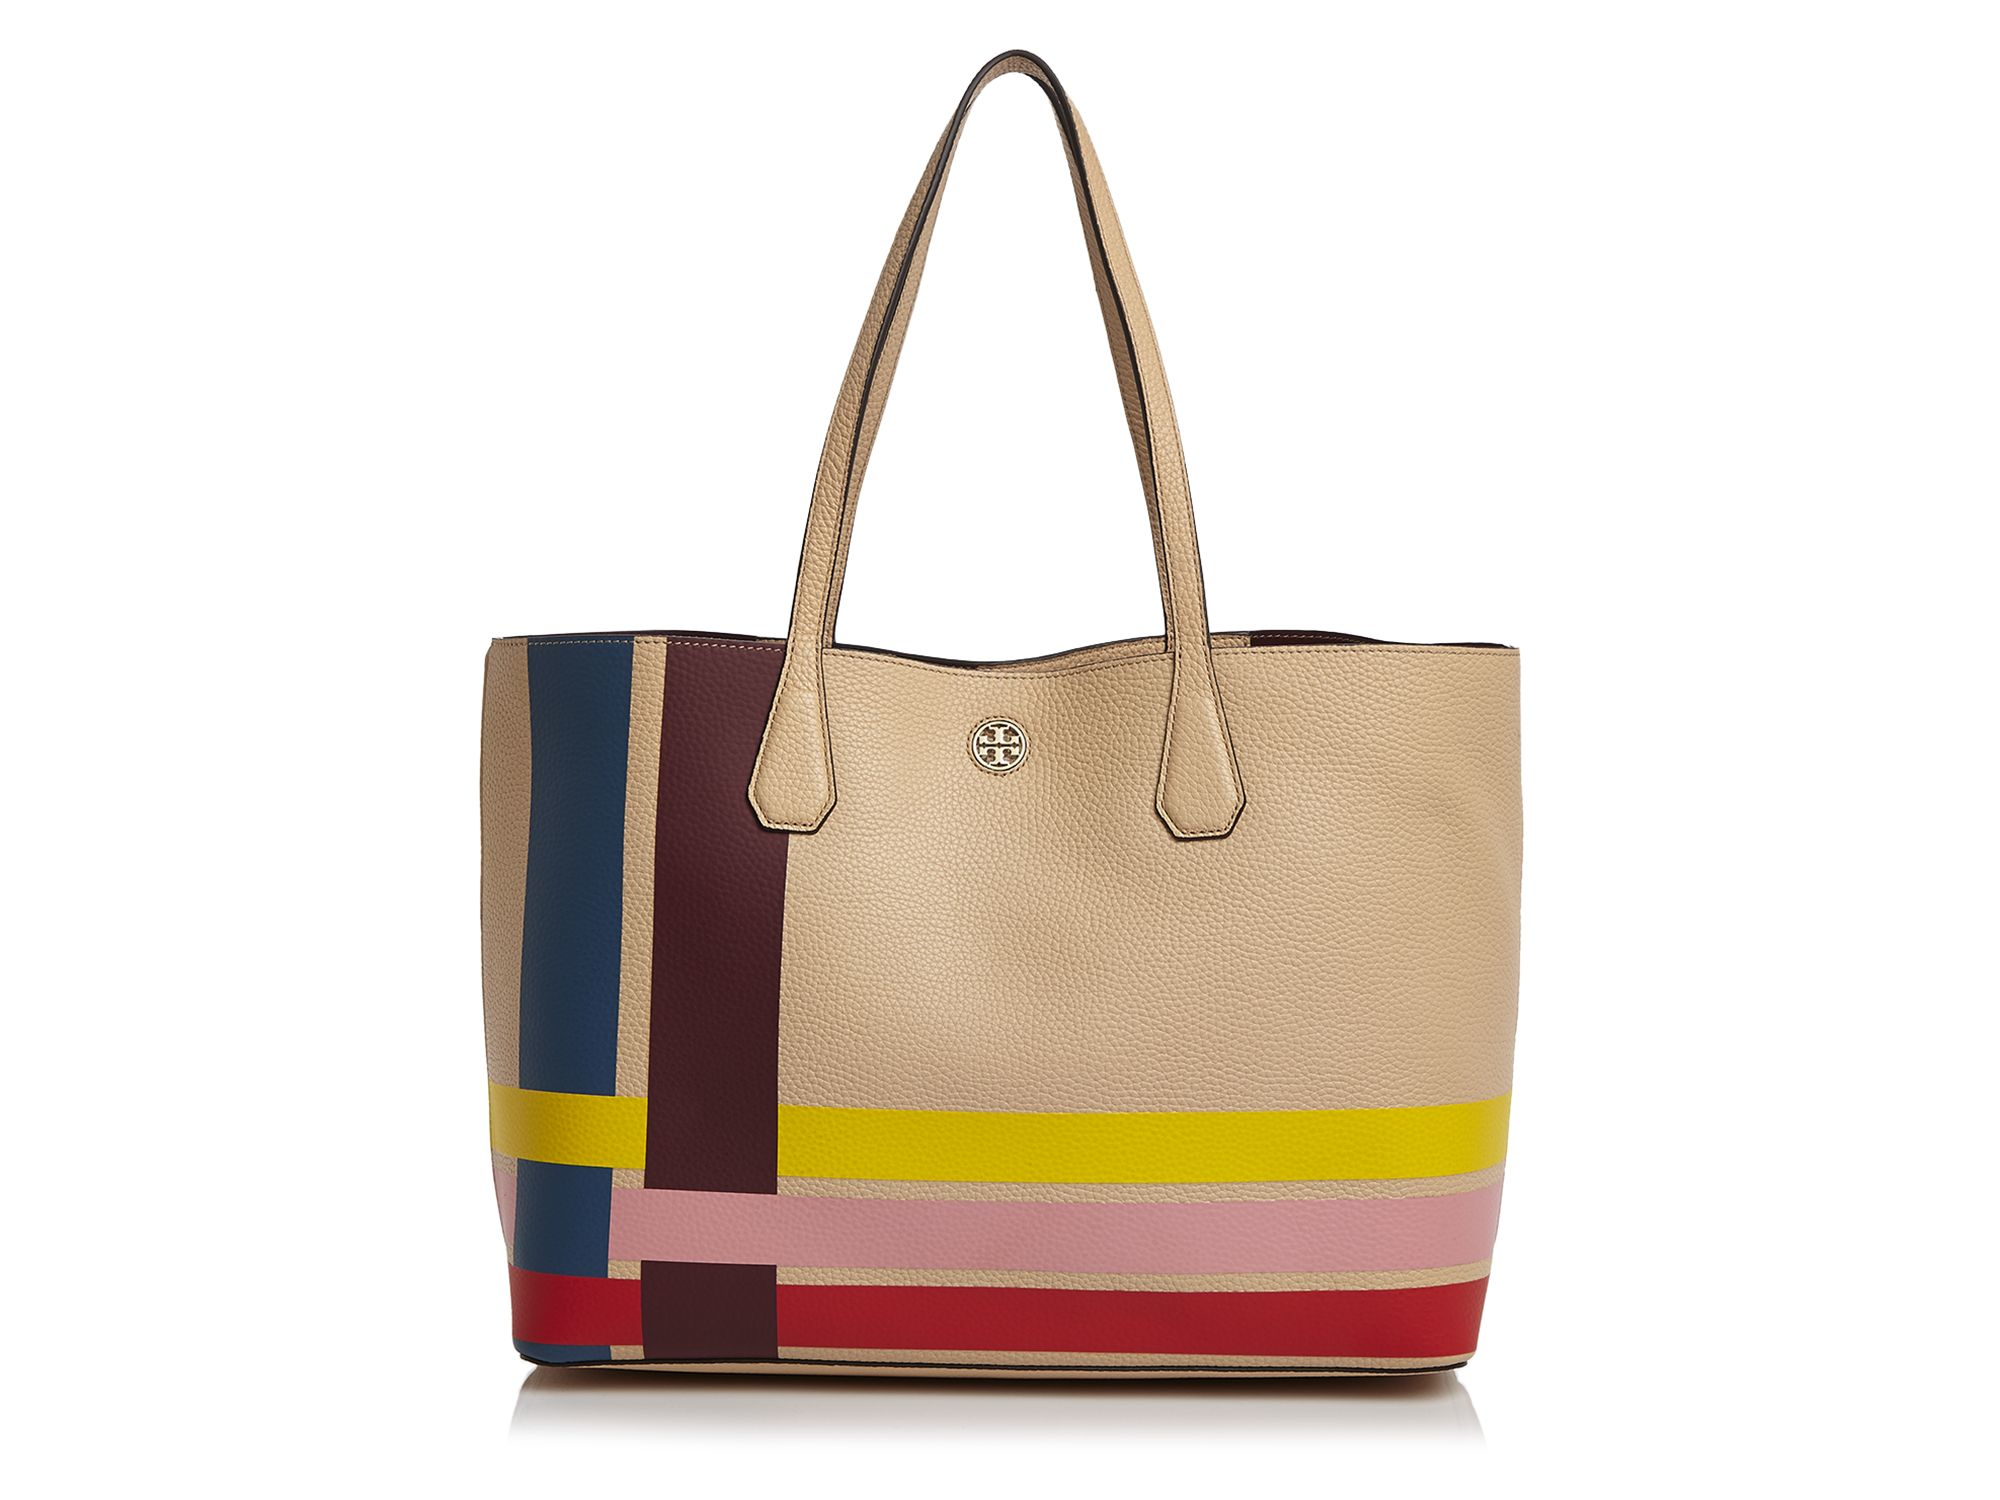 Tory burch Multi-color Stripe Perry Tote in Brown | Lyst